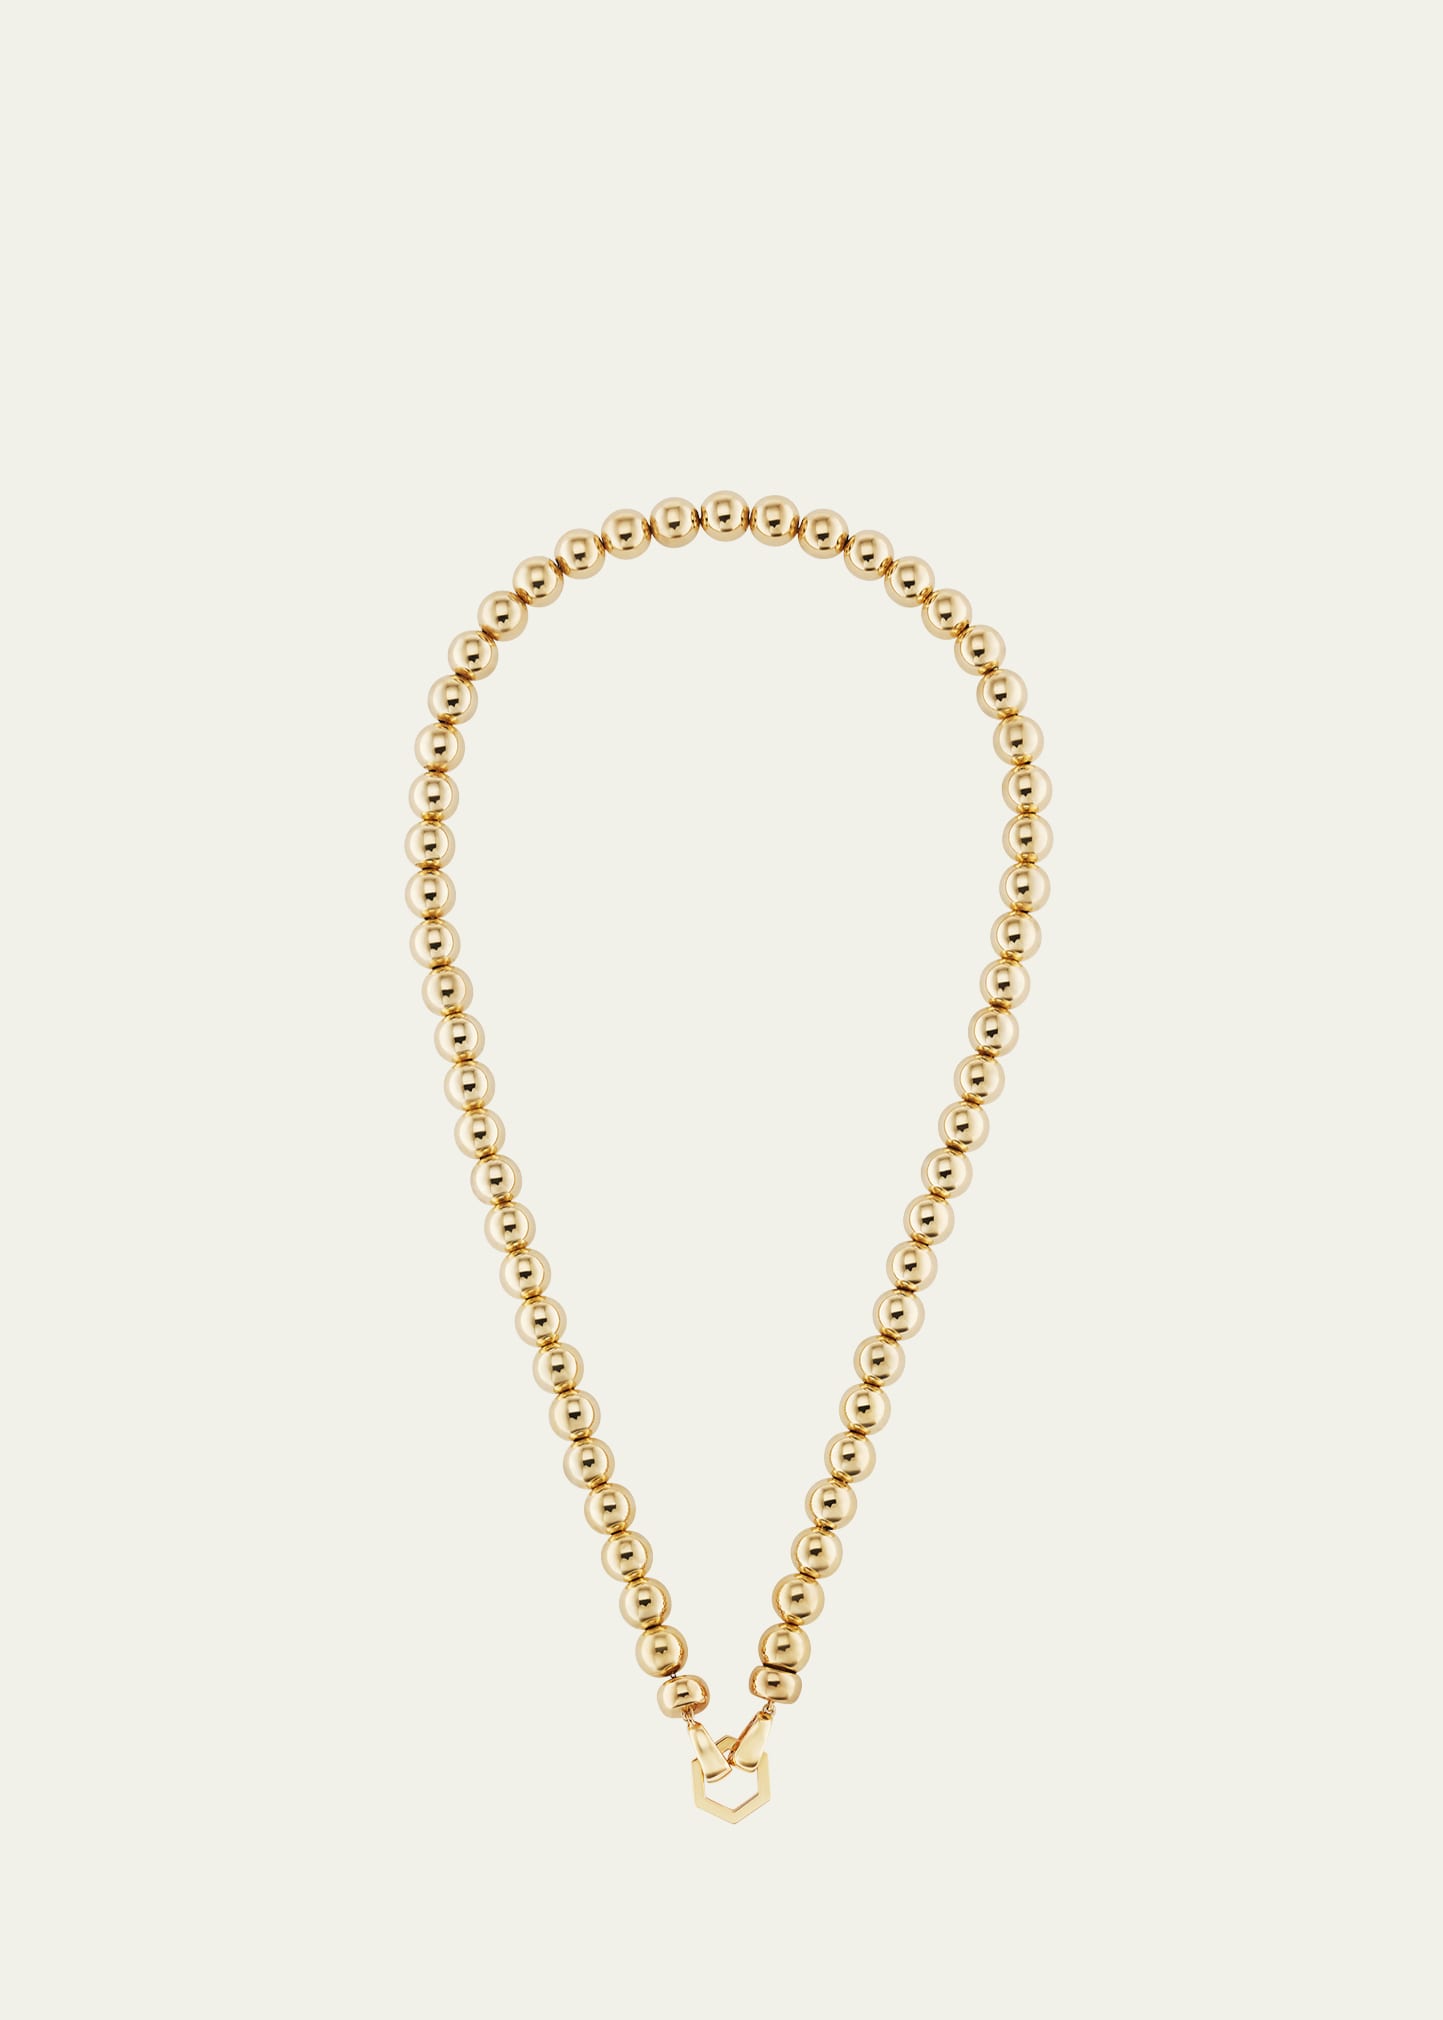 Harwell Godfrey Extra-large Ball Chain Foundation Necklace, 18"l In Yg